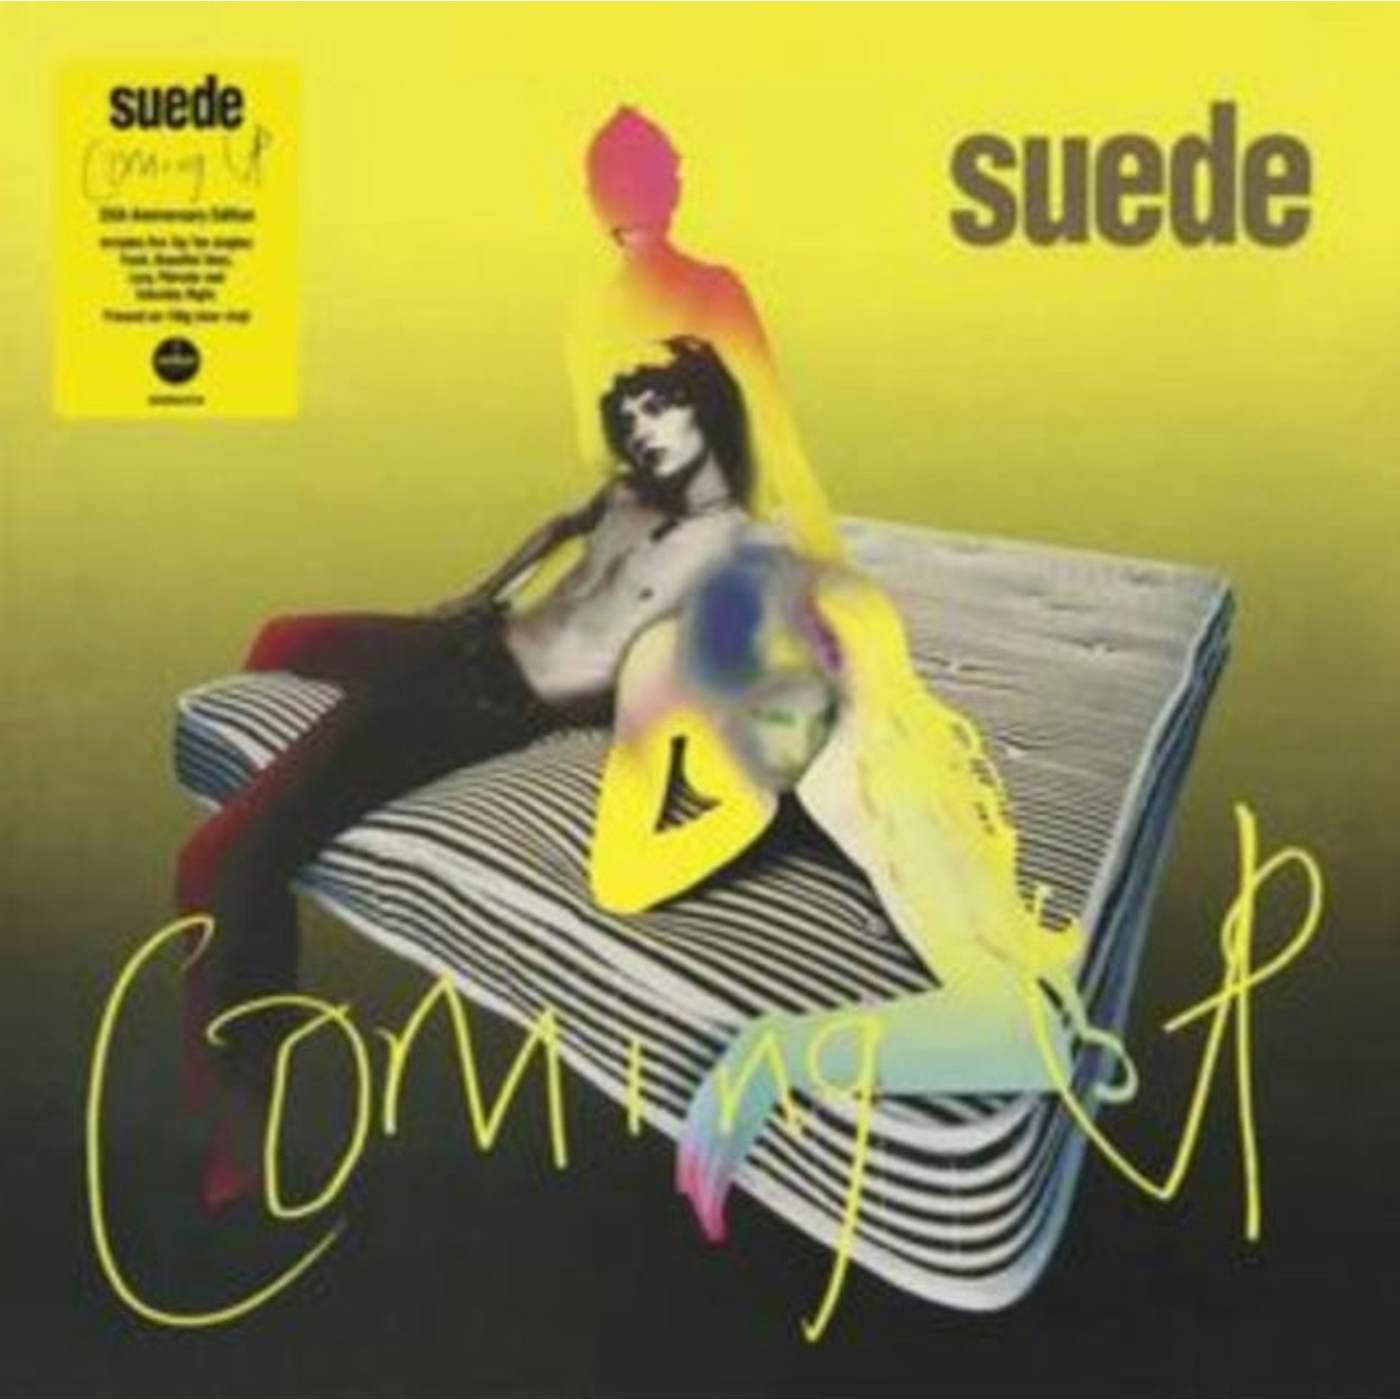 Suede LP Vinyl Record - Coming Up (25th Anniversary Edition) (Clear Vinyl)